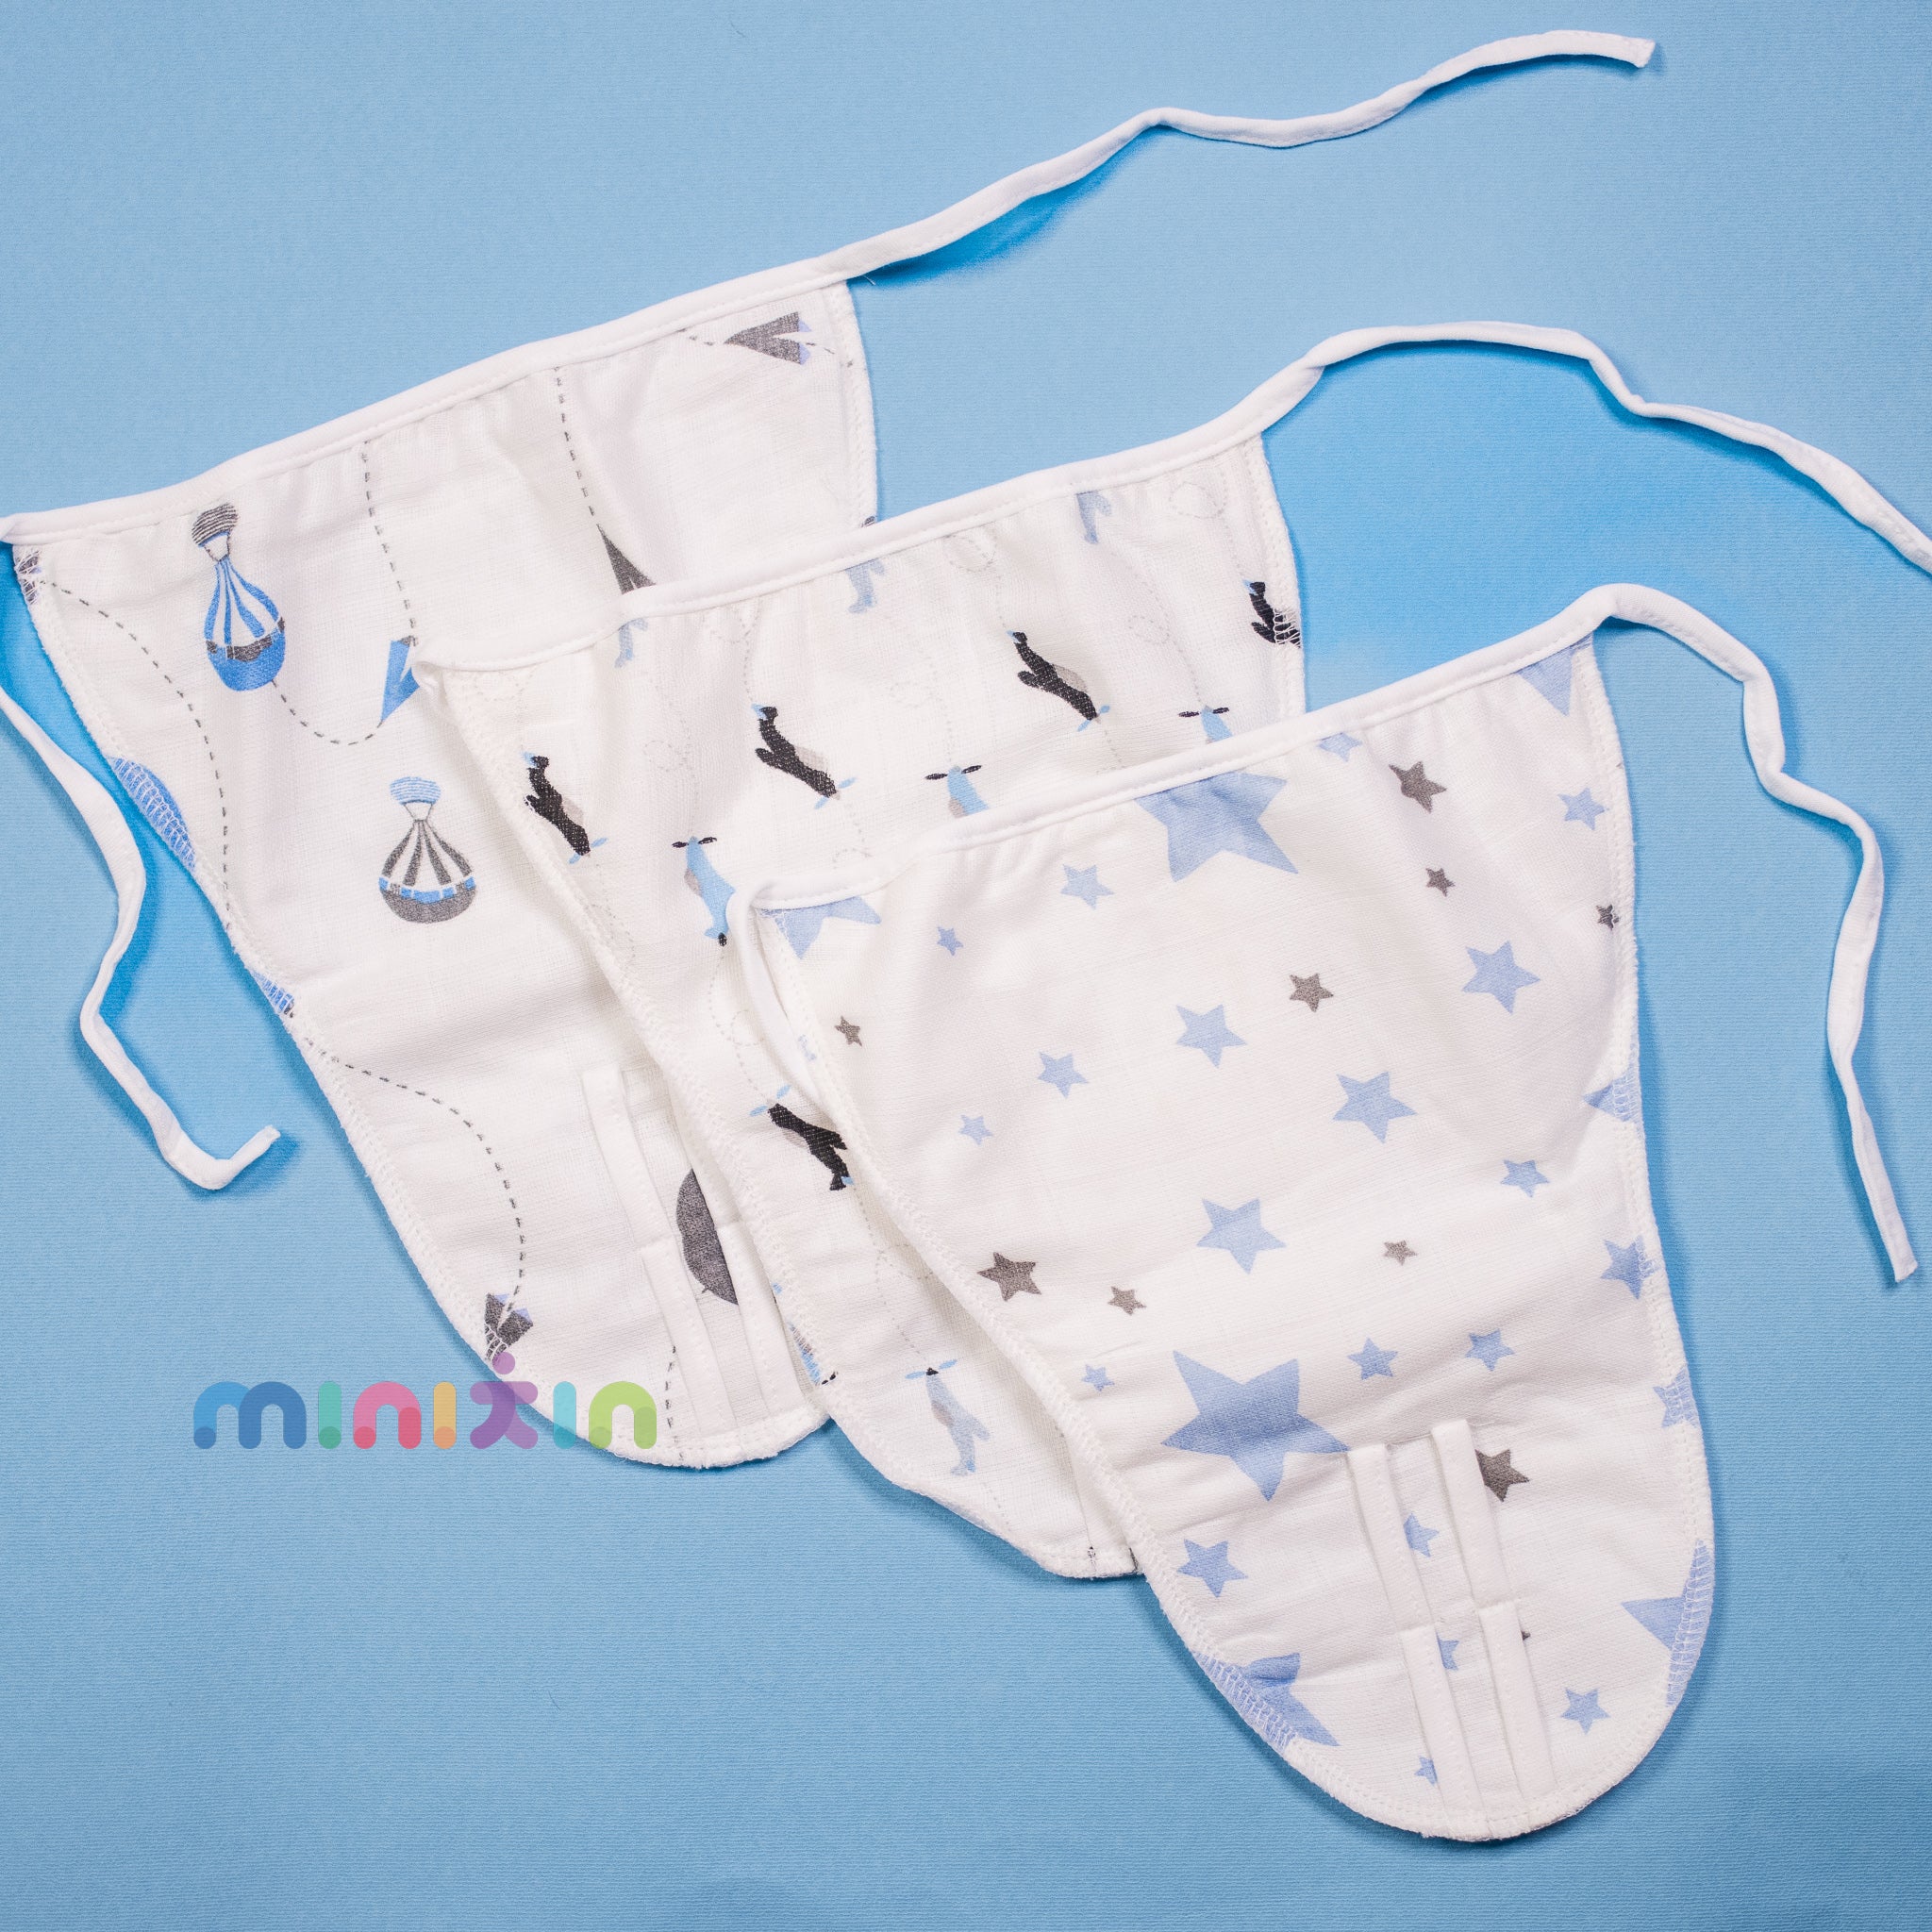 Extra Soft Organic Cotton Muslin Nappies for NewBorn Baby - Pack of 3 - Assorted Prints - The Minikin Store